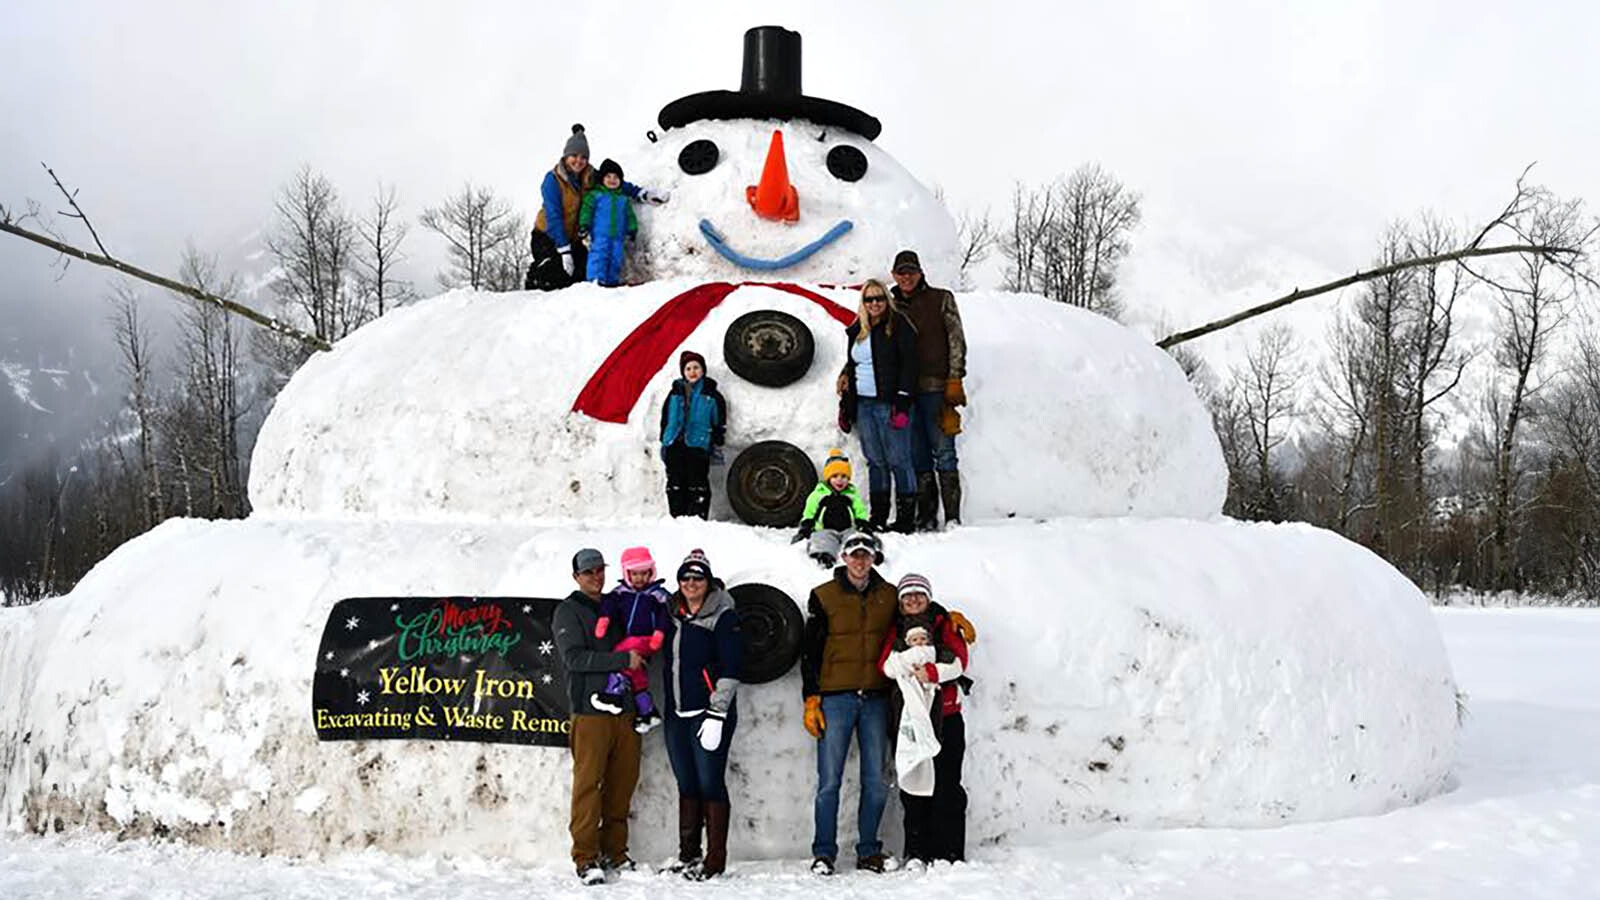 Since 2012, the Garvin family and Yellow Iron Excavating and Waste Removal in Jackson has built this humongous snowman near Teton Village.